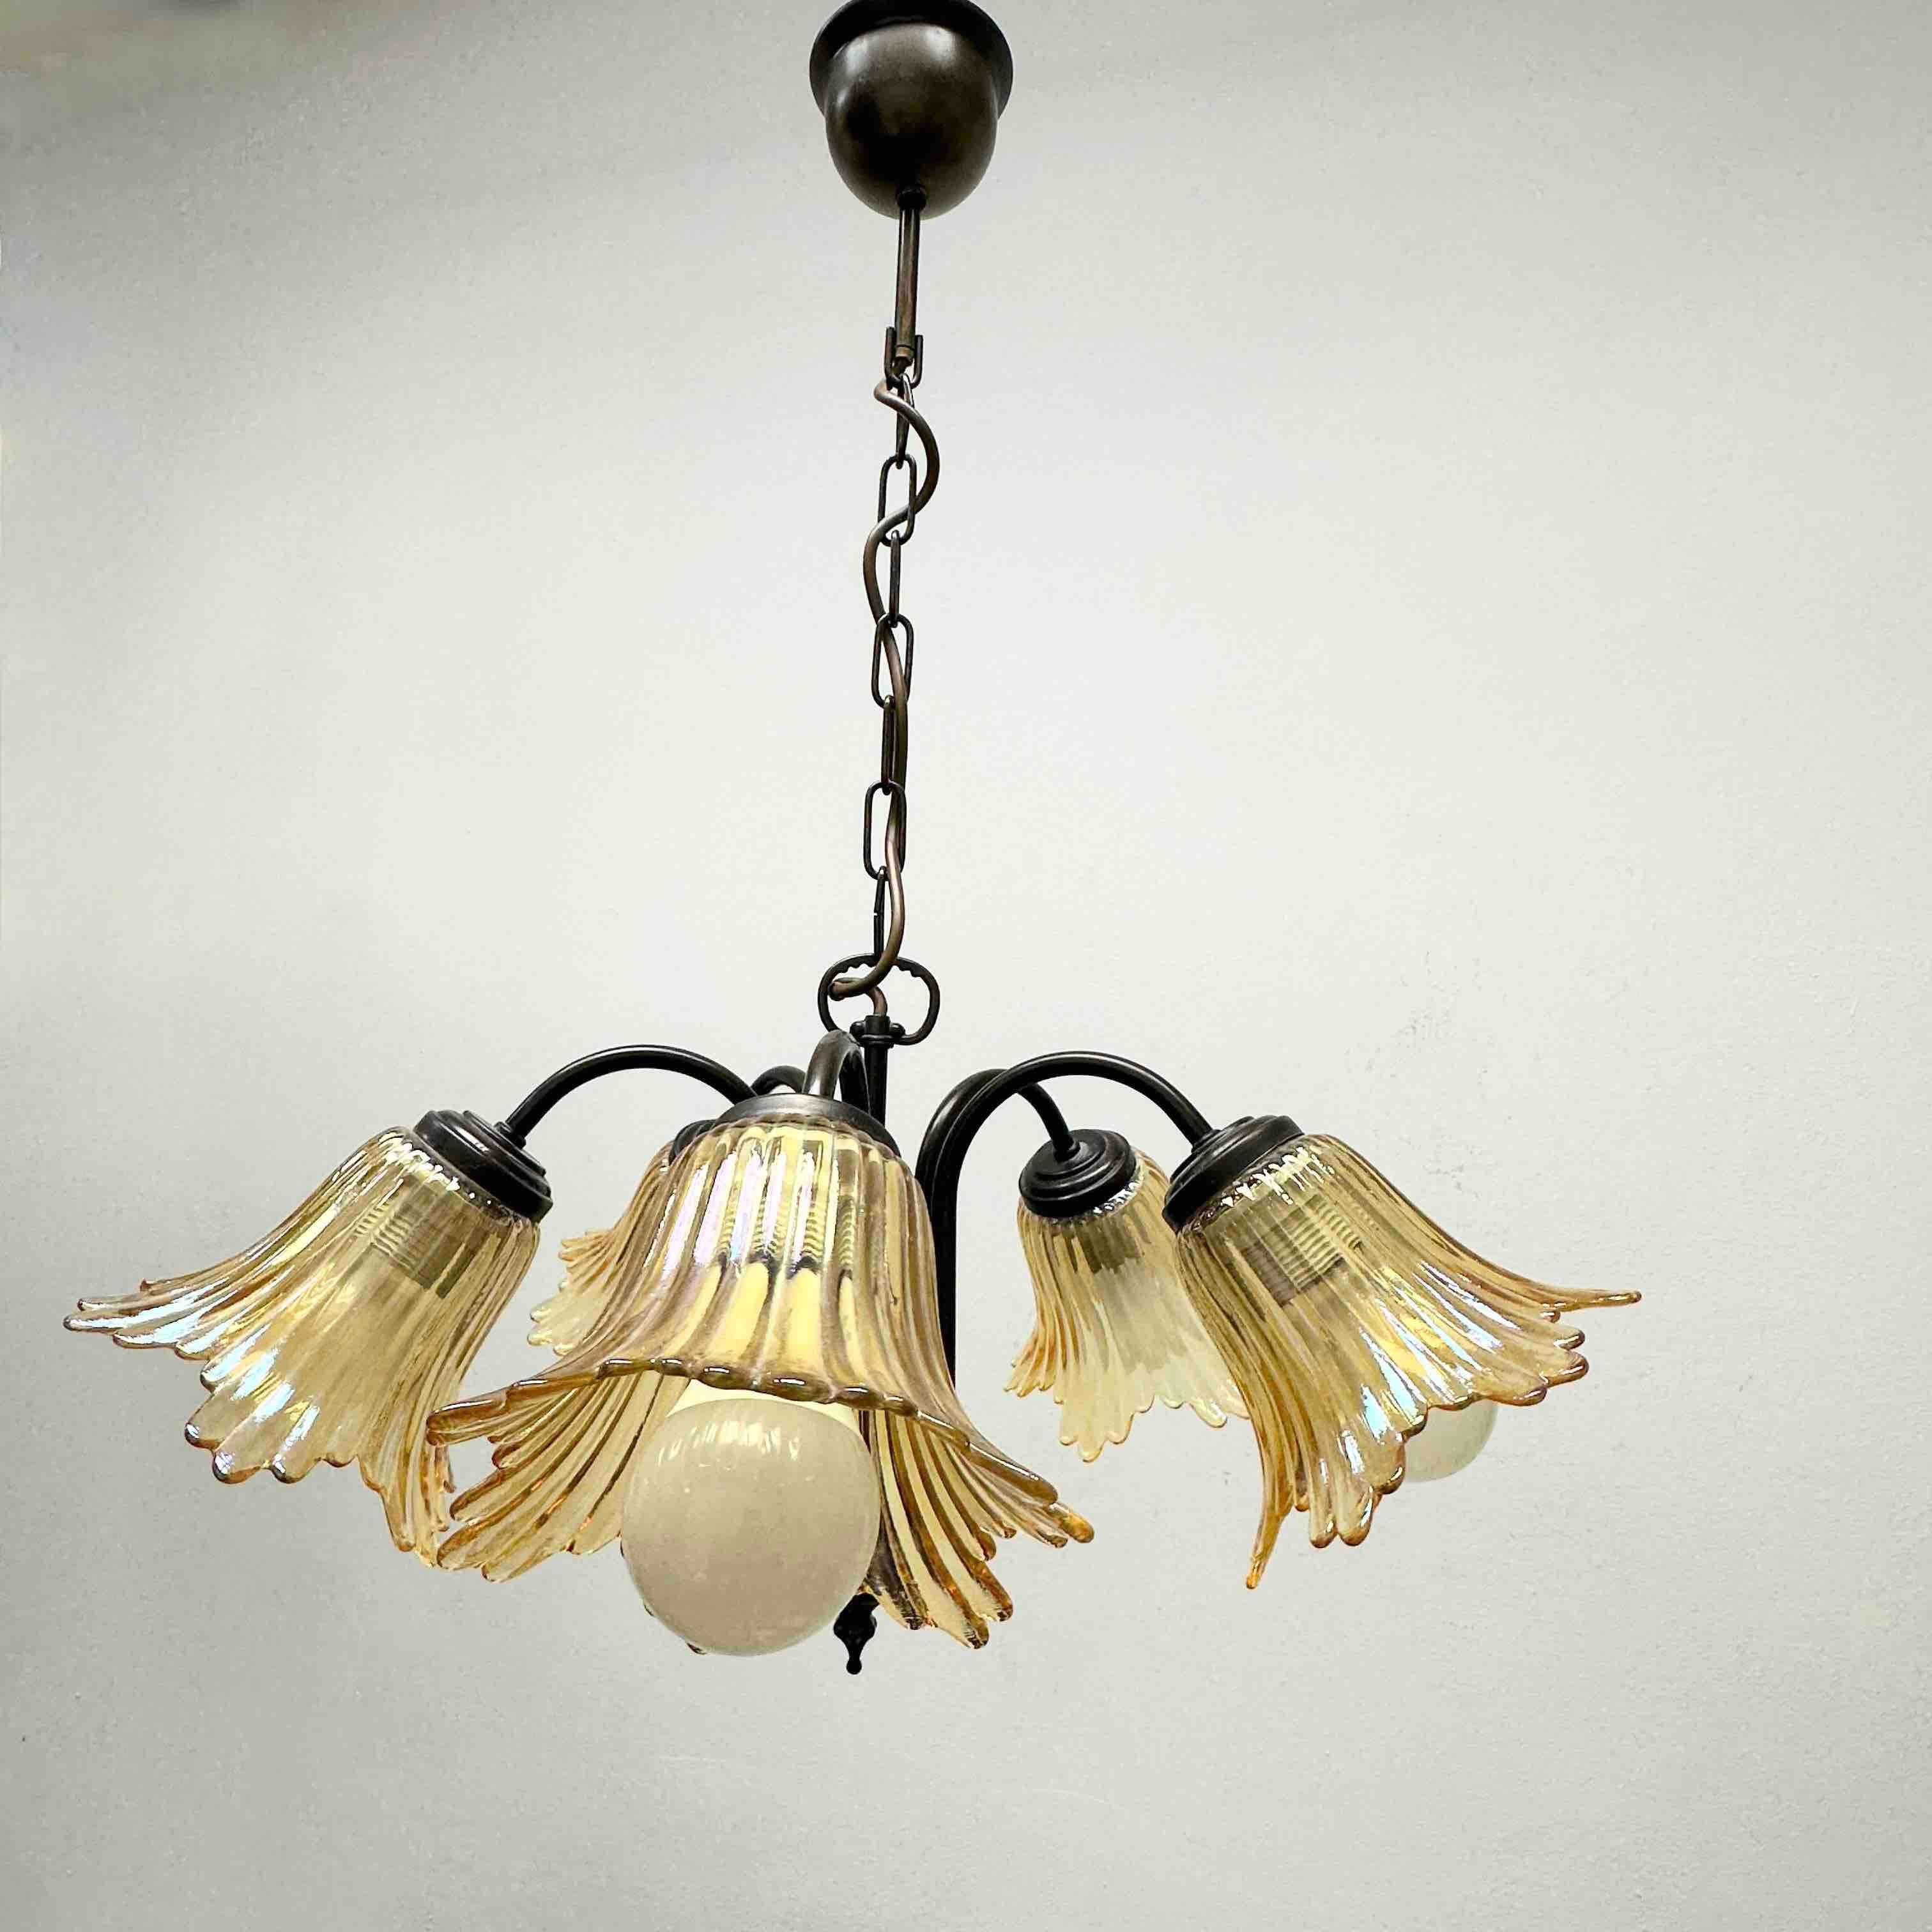 Gorgeous German Tole Wood Metal Glas Shade Five Light Chandelier, 1970s In Good Condition For Sale In Nuernberg, DE